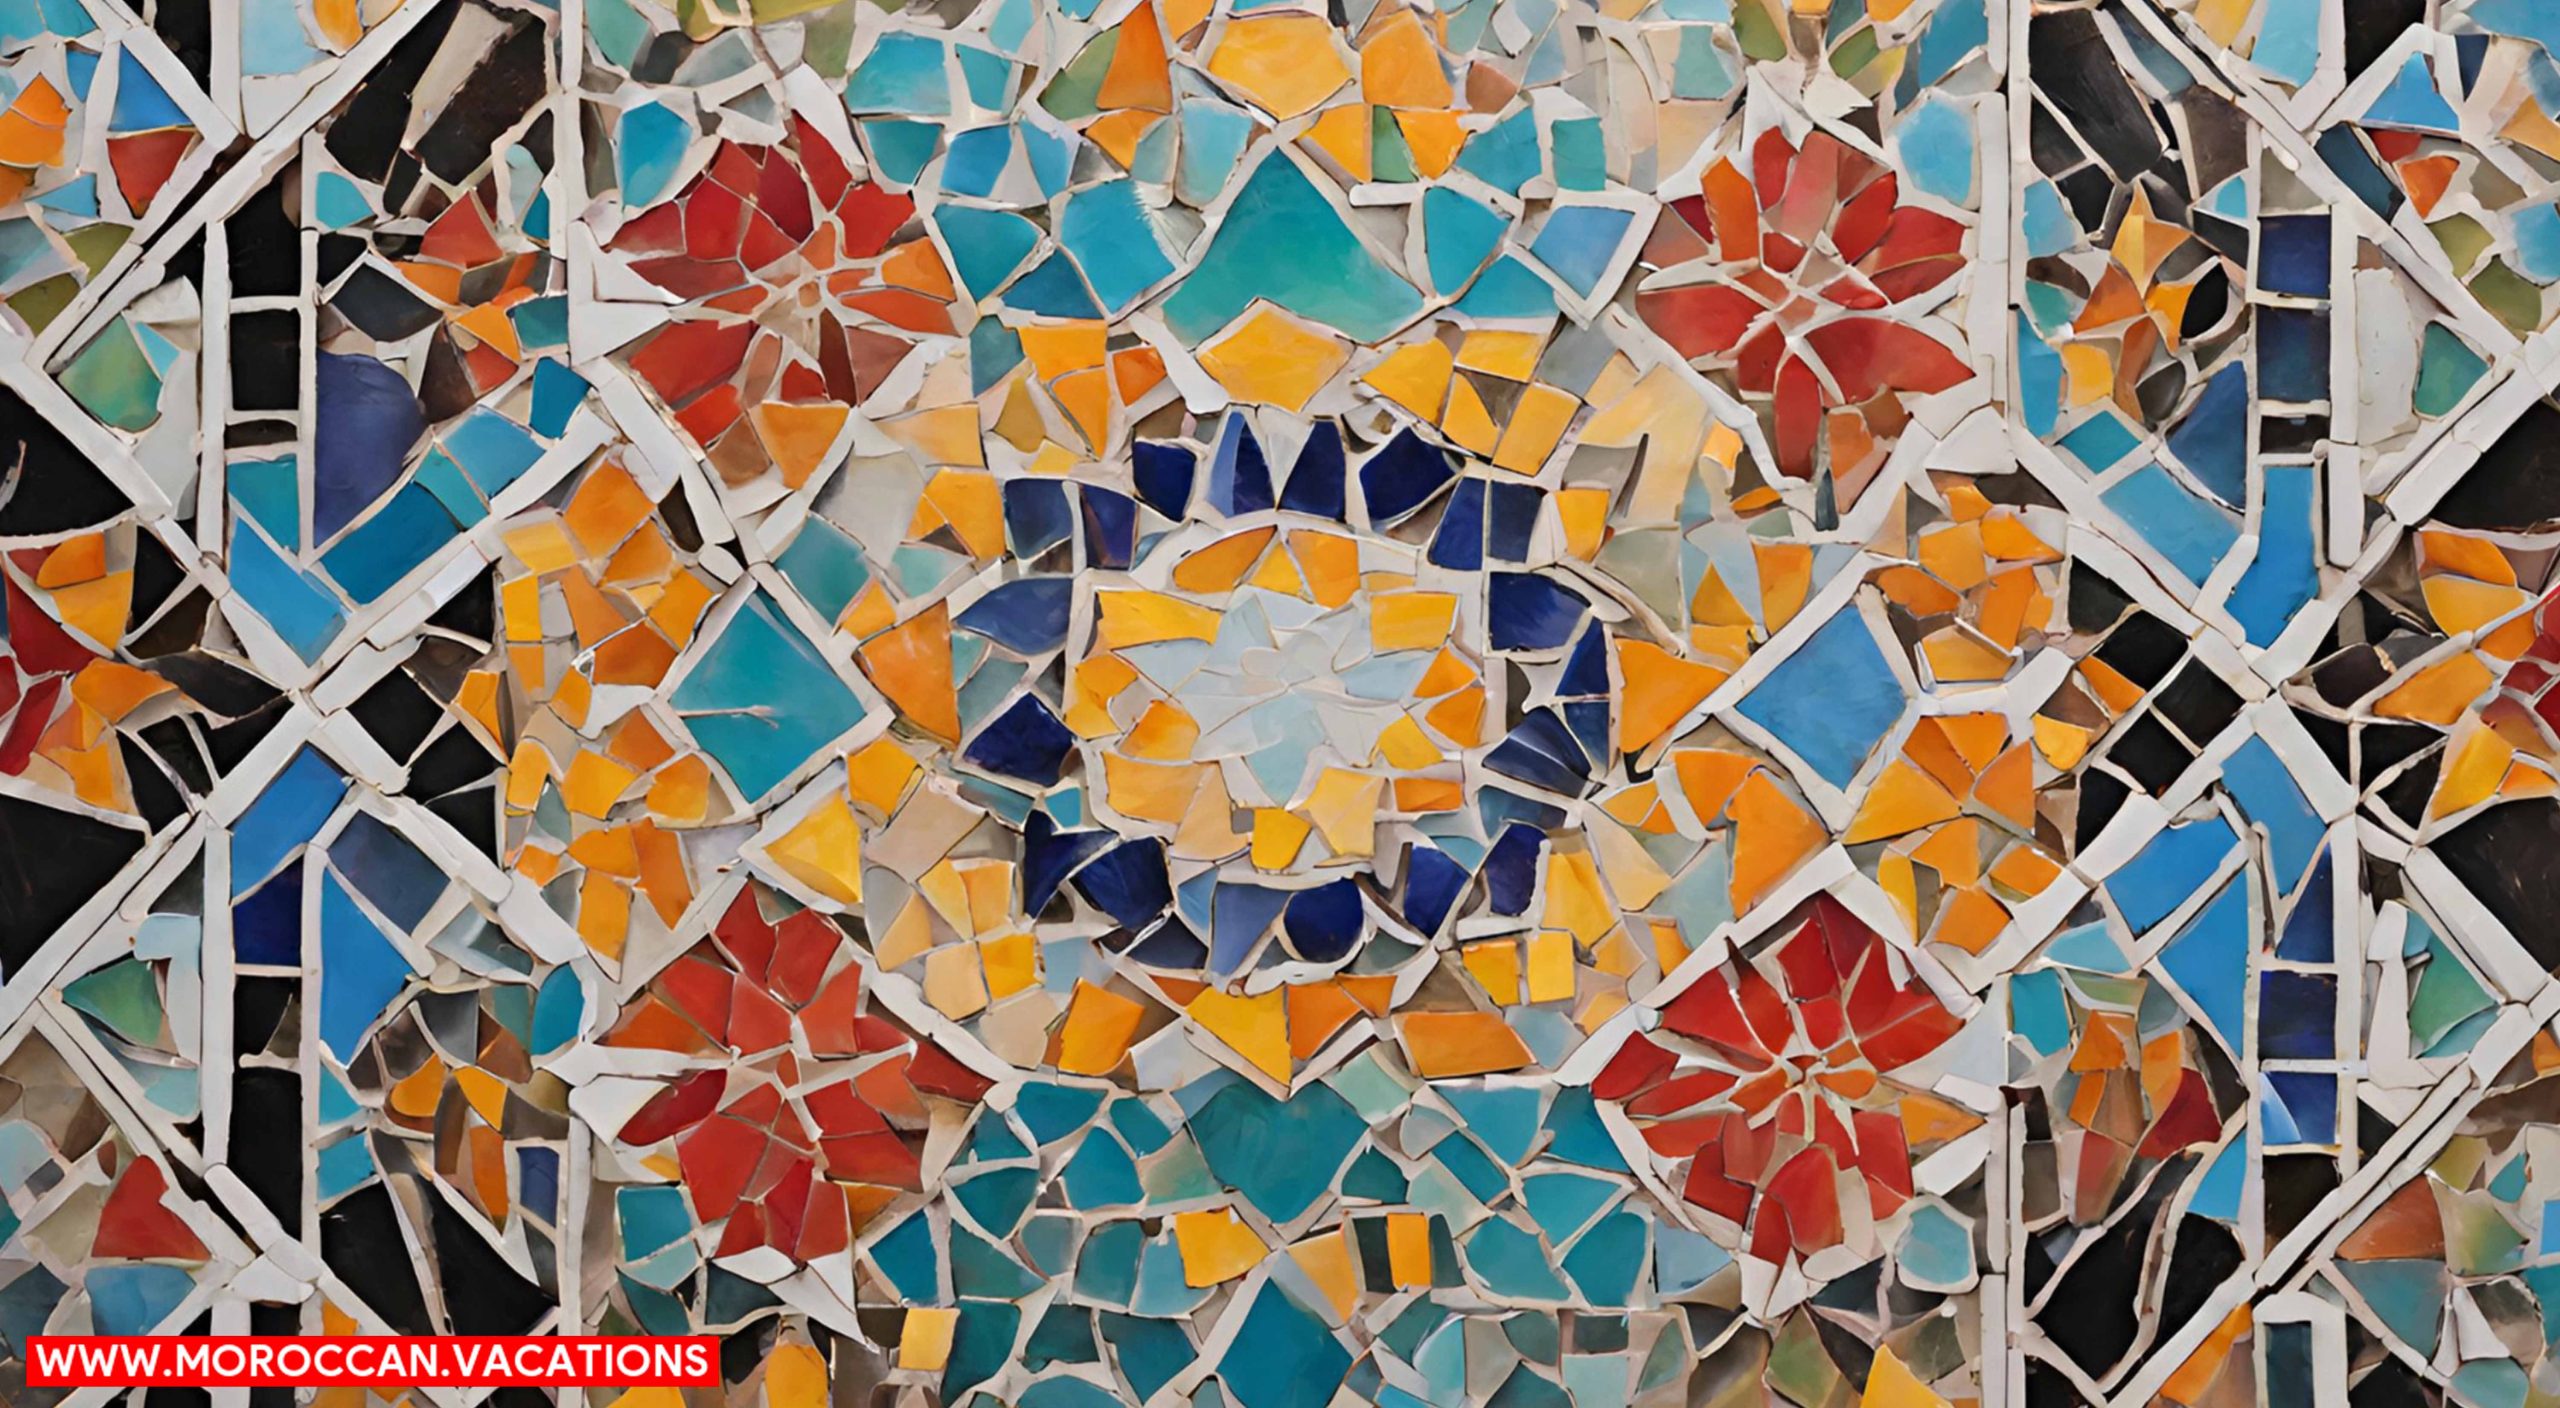 A vibrant Moroccan mosaic artwork fused with contemporary graffiti elements.